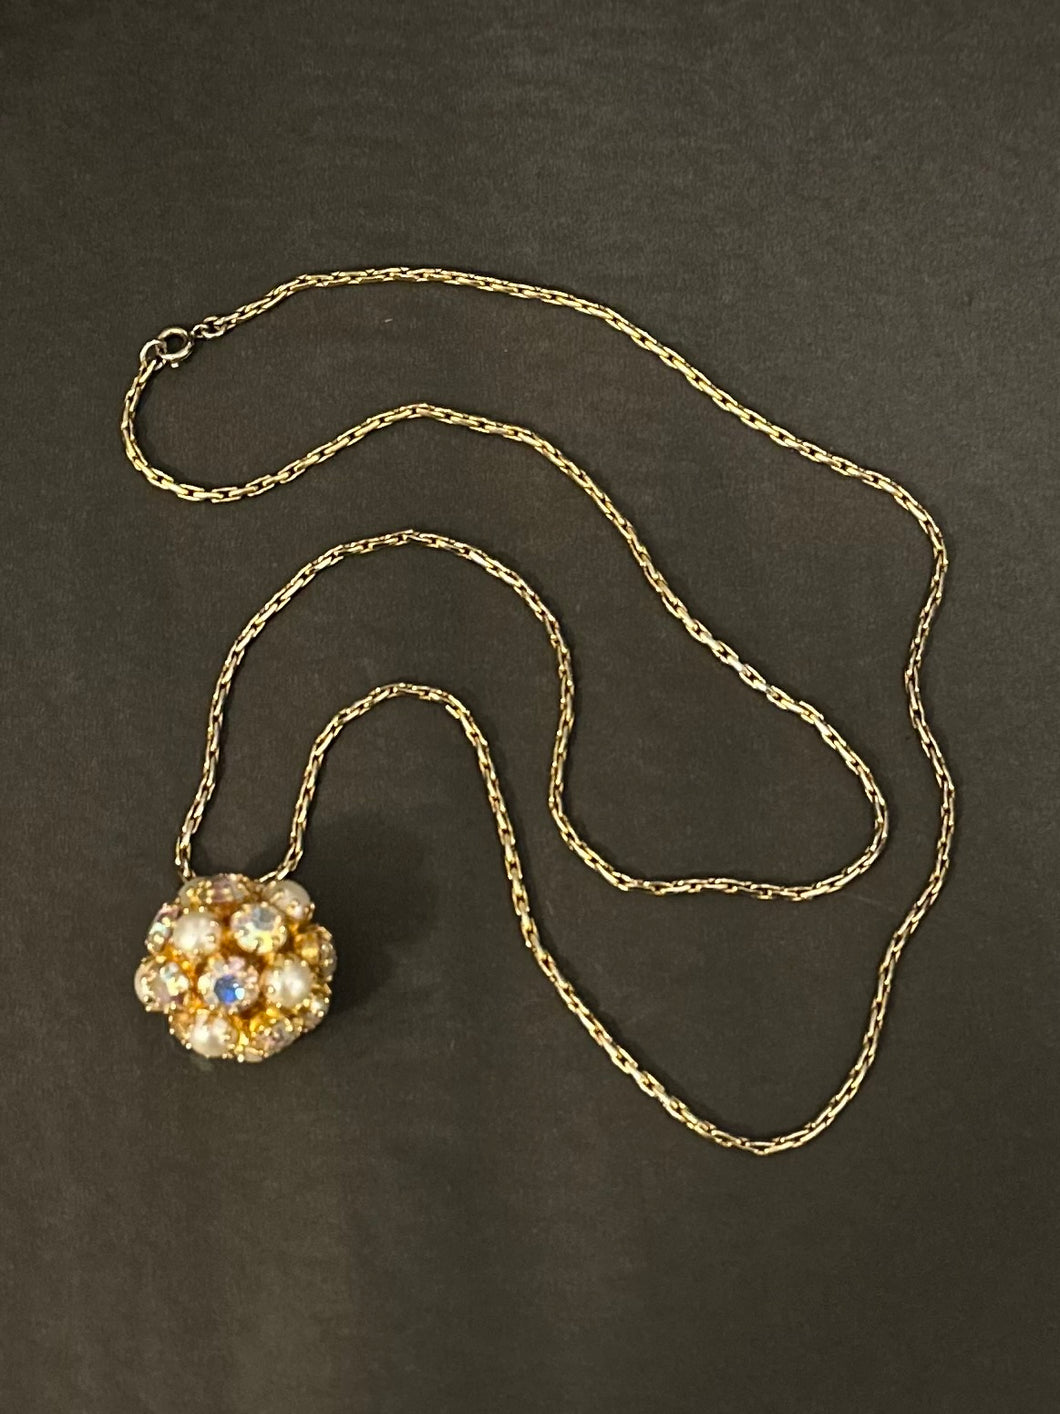 Vintage Midcentury Aurora Borealis Crystal & Faux Pearl Cluster Ball Gold Tone Pendant Necklace 32”